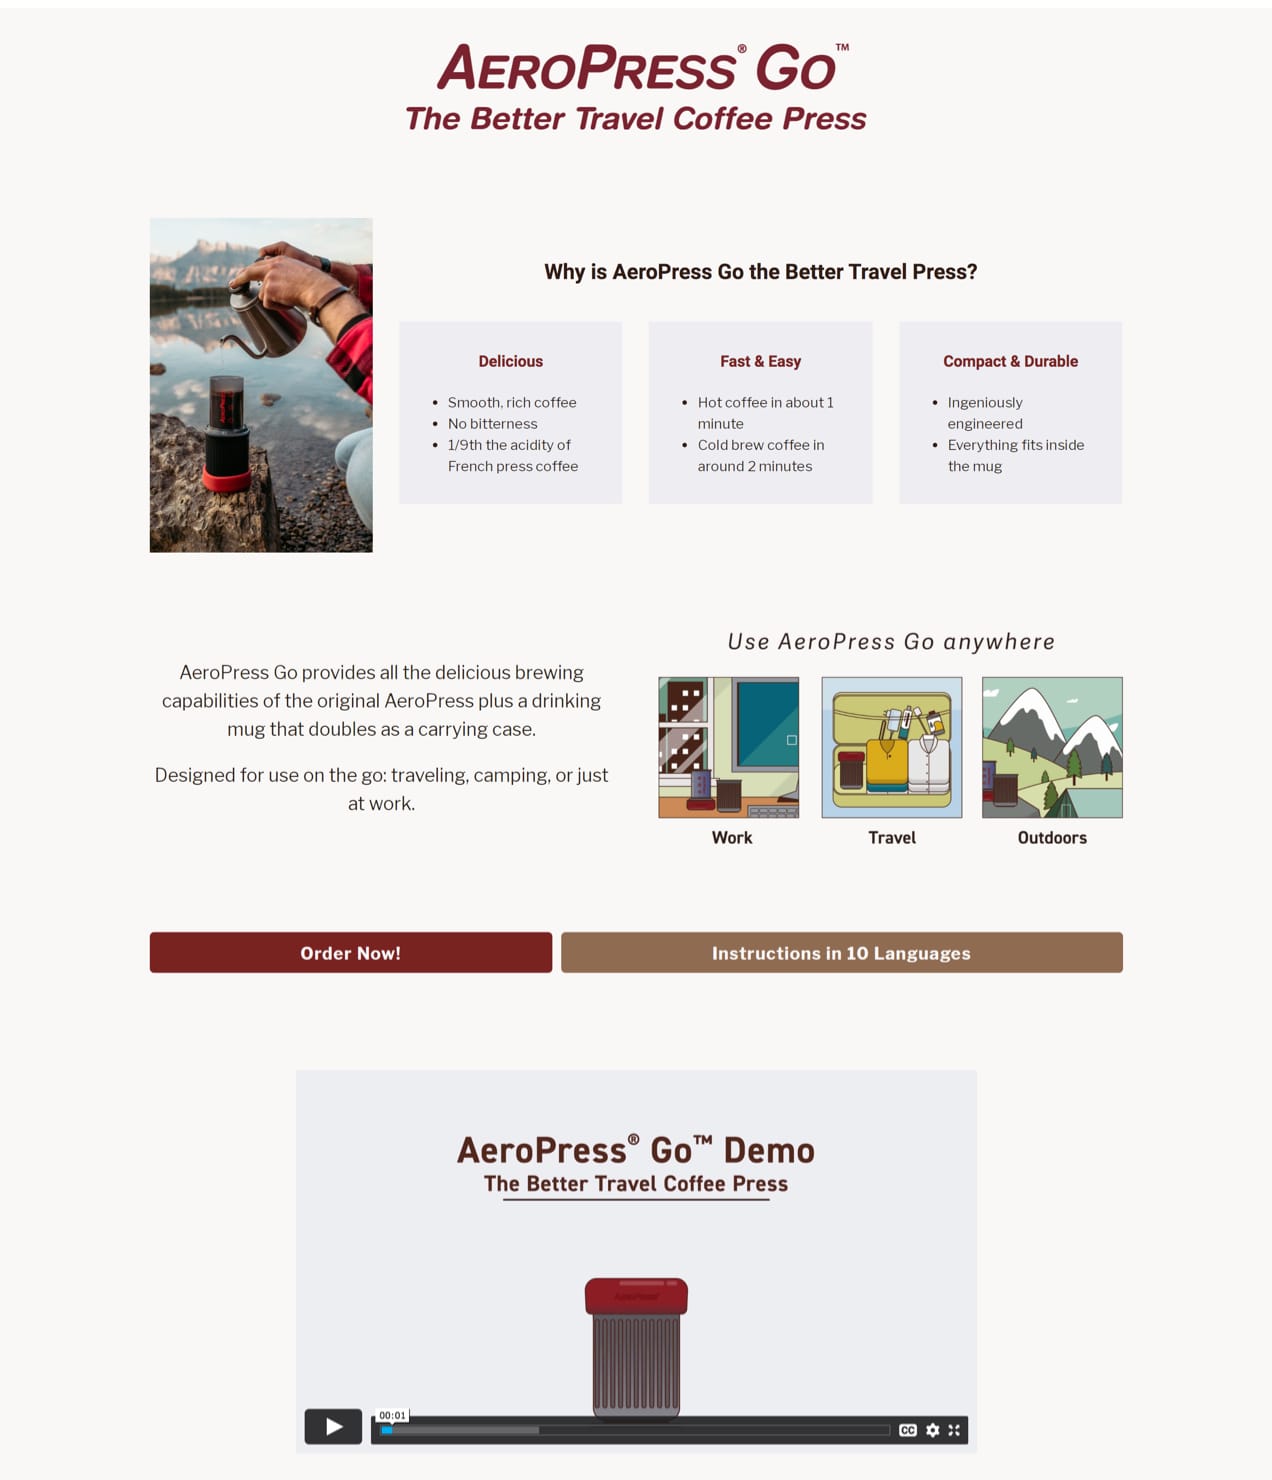 AeroPress includes a demo video on their landing page for a travel coffee press.